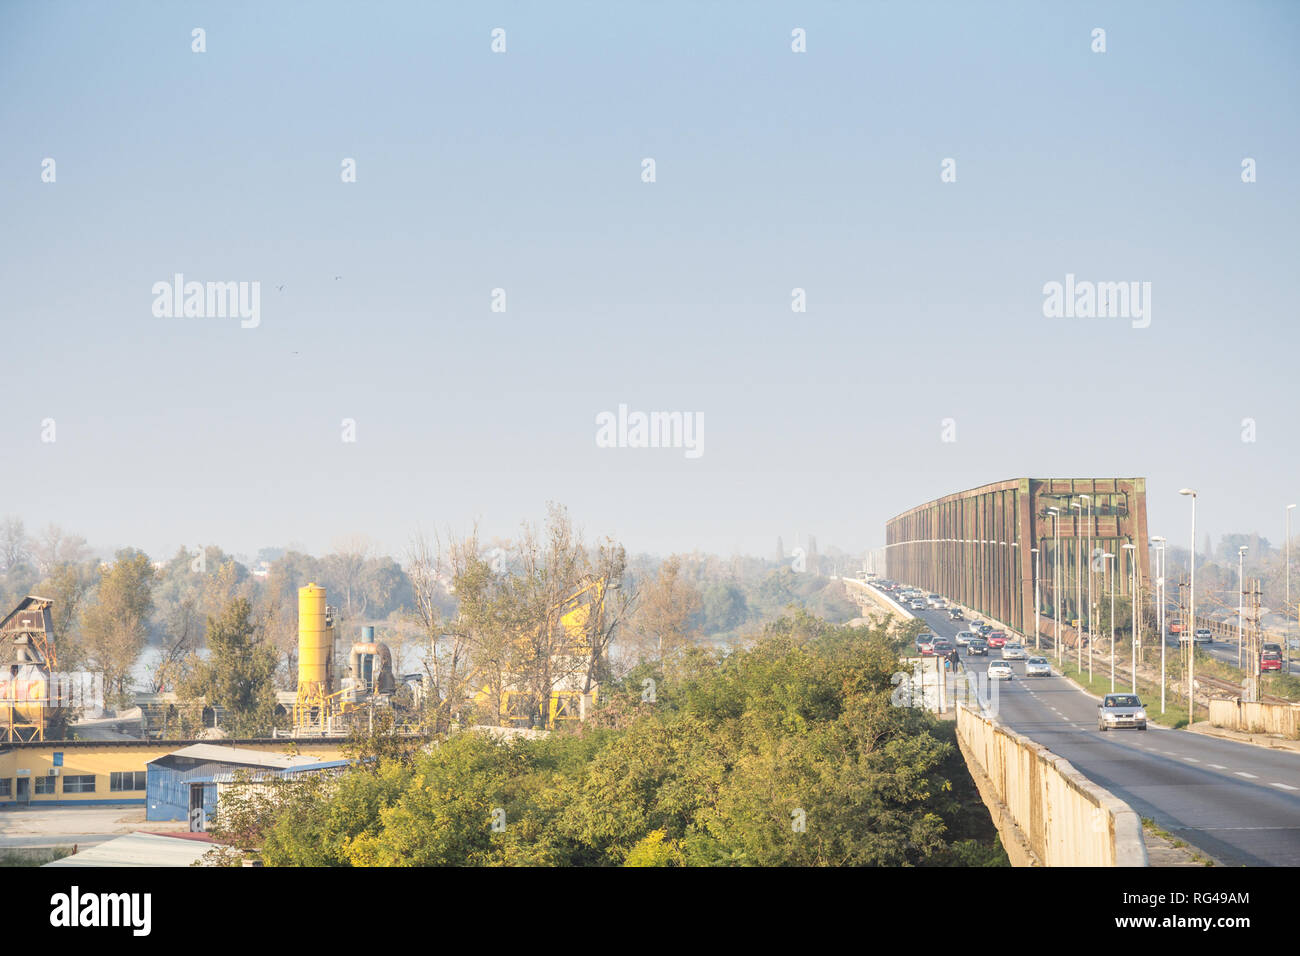 BELGRADE, SERBIA - AUGUST 2, 2015: Dense car traffic passing by the Pancevacki Most, or Pancevo bridge, during a day of bad atmospheric air quality wi Stock Photo